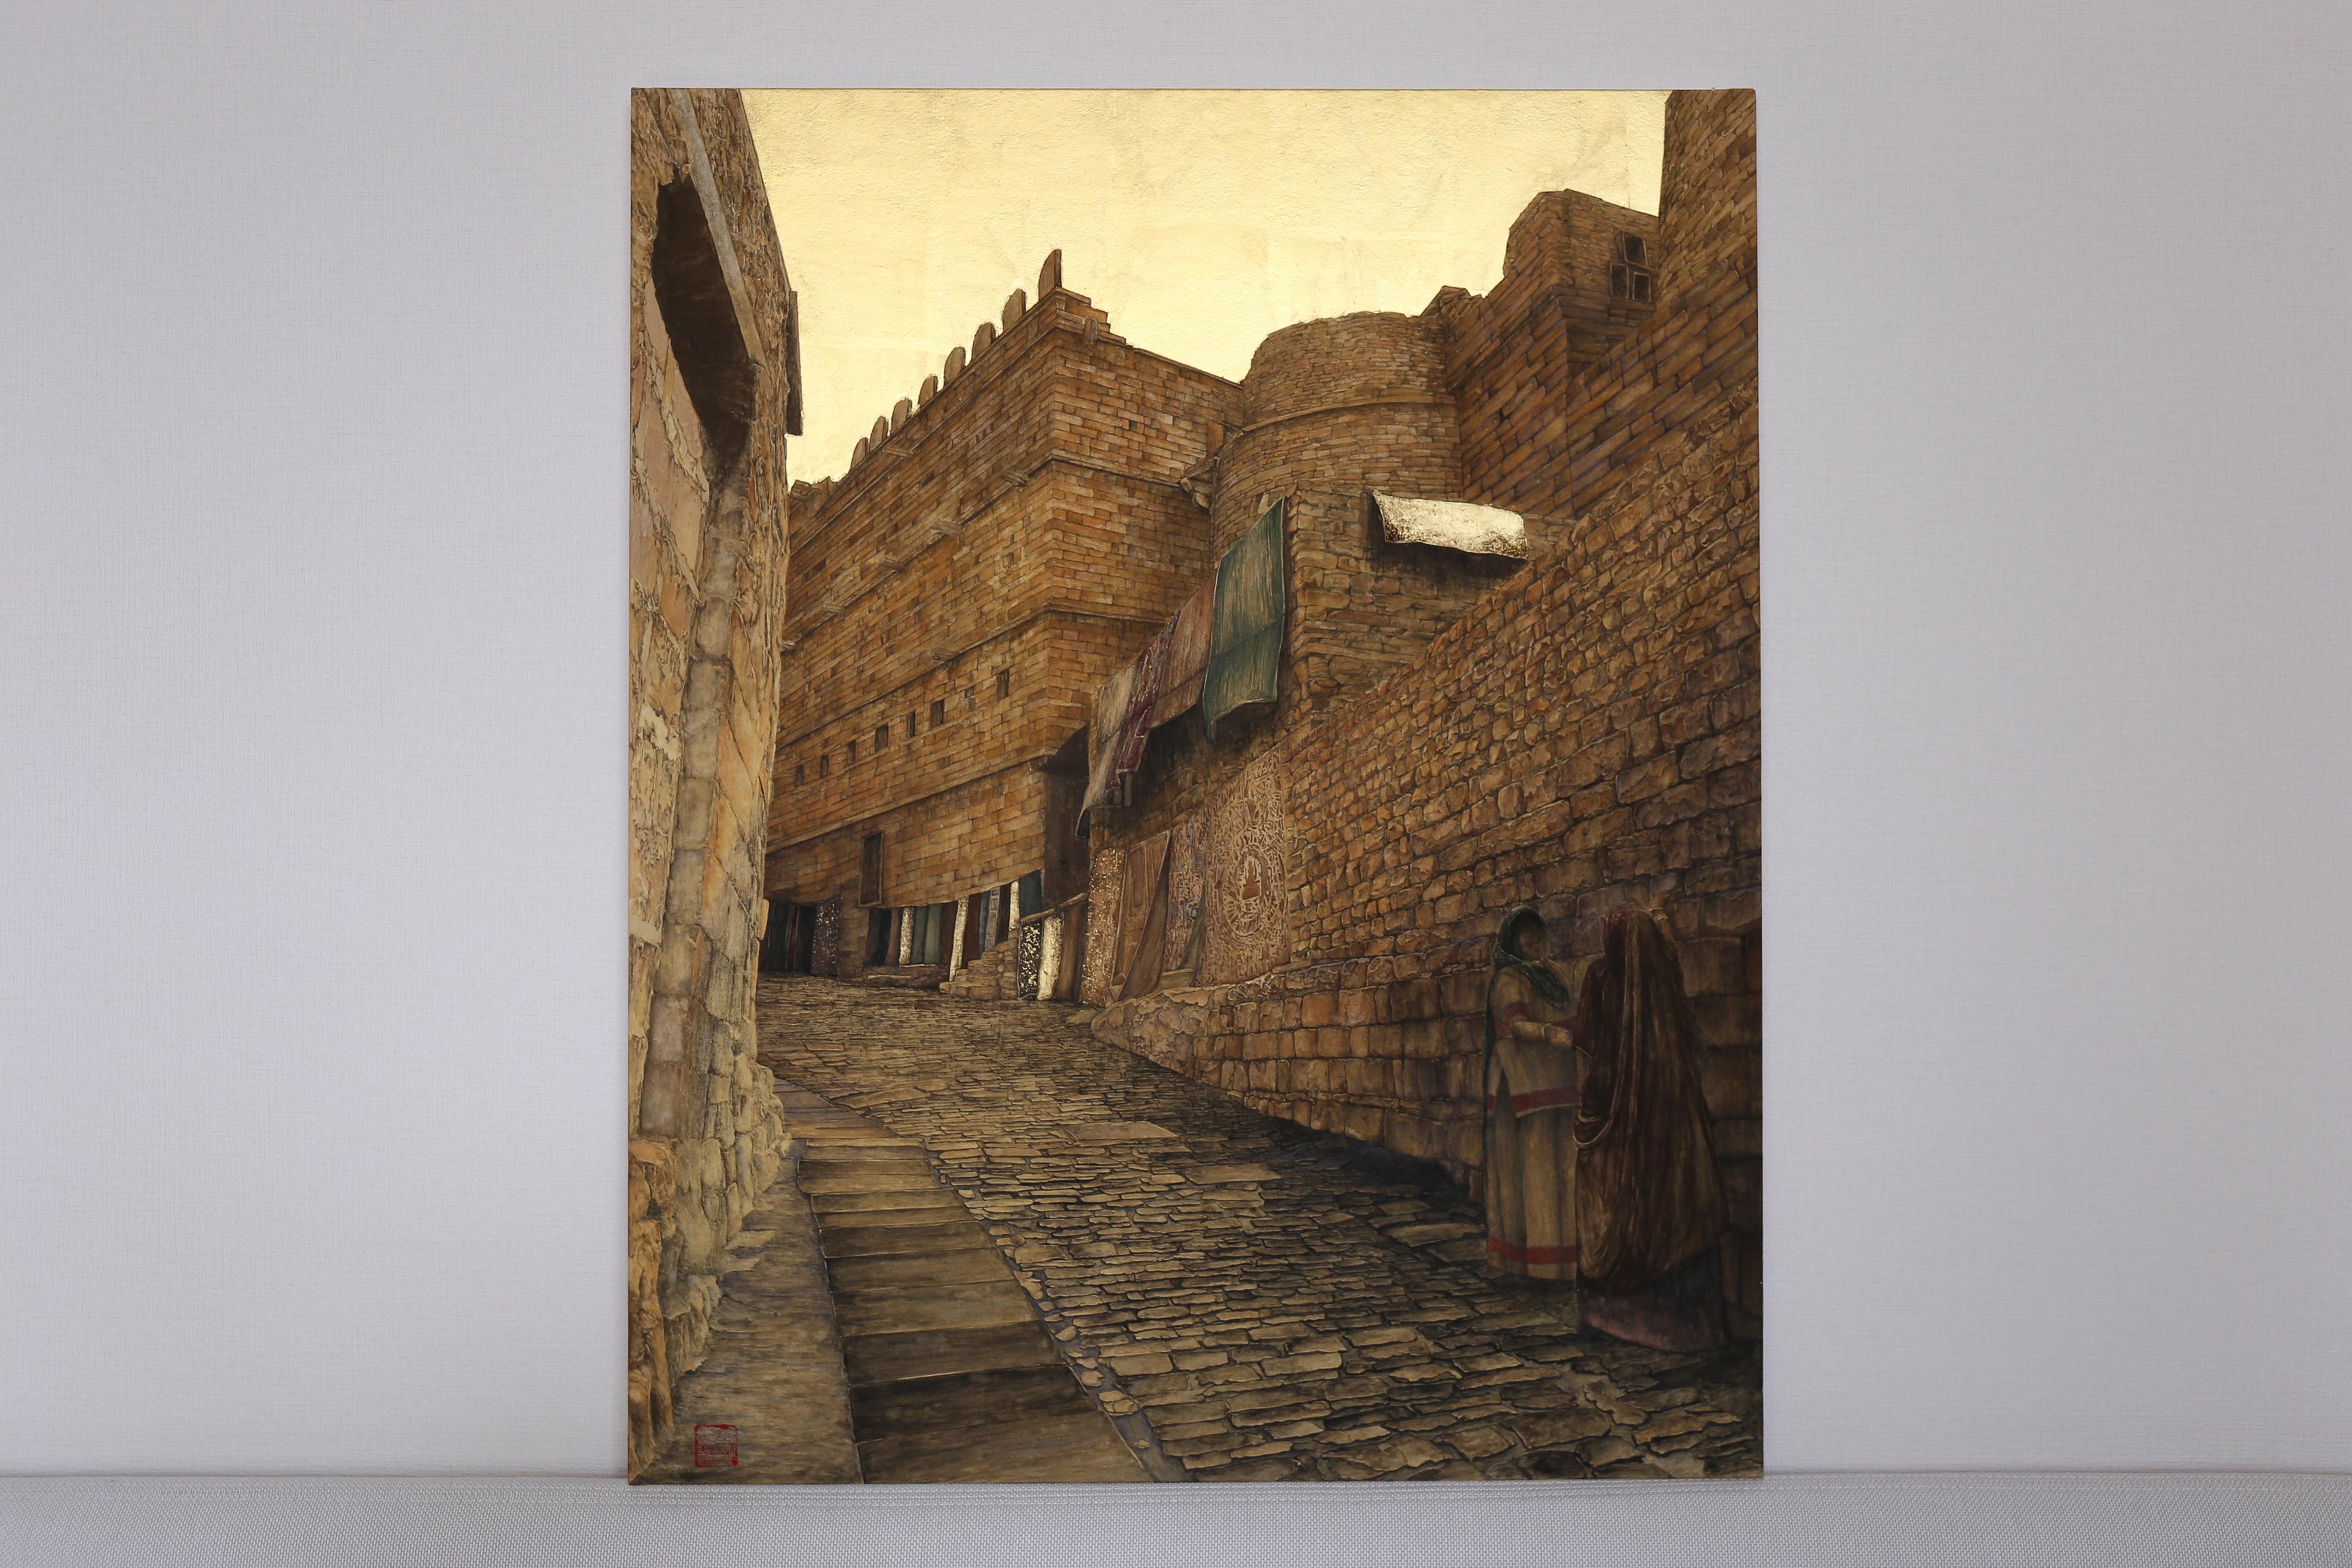 Street of Jaisalmer - Gold Leaf, Mineral and Ores Painting, Streetscape Realism For Sale 11